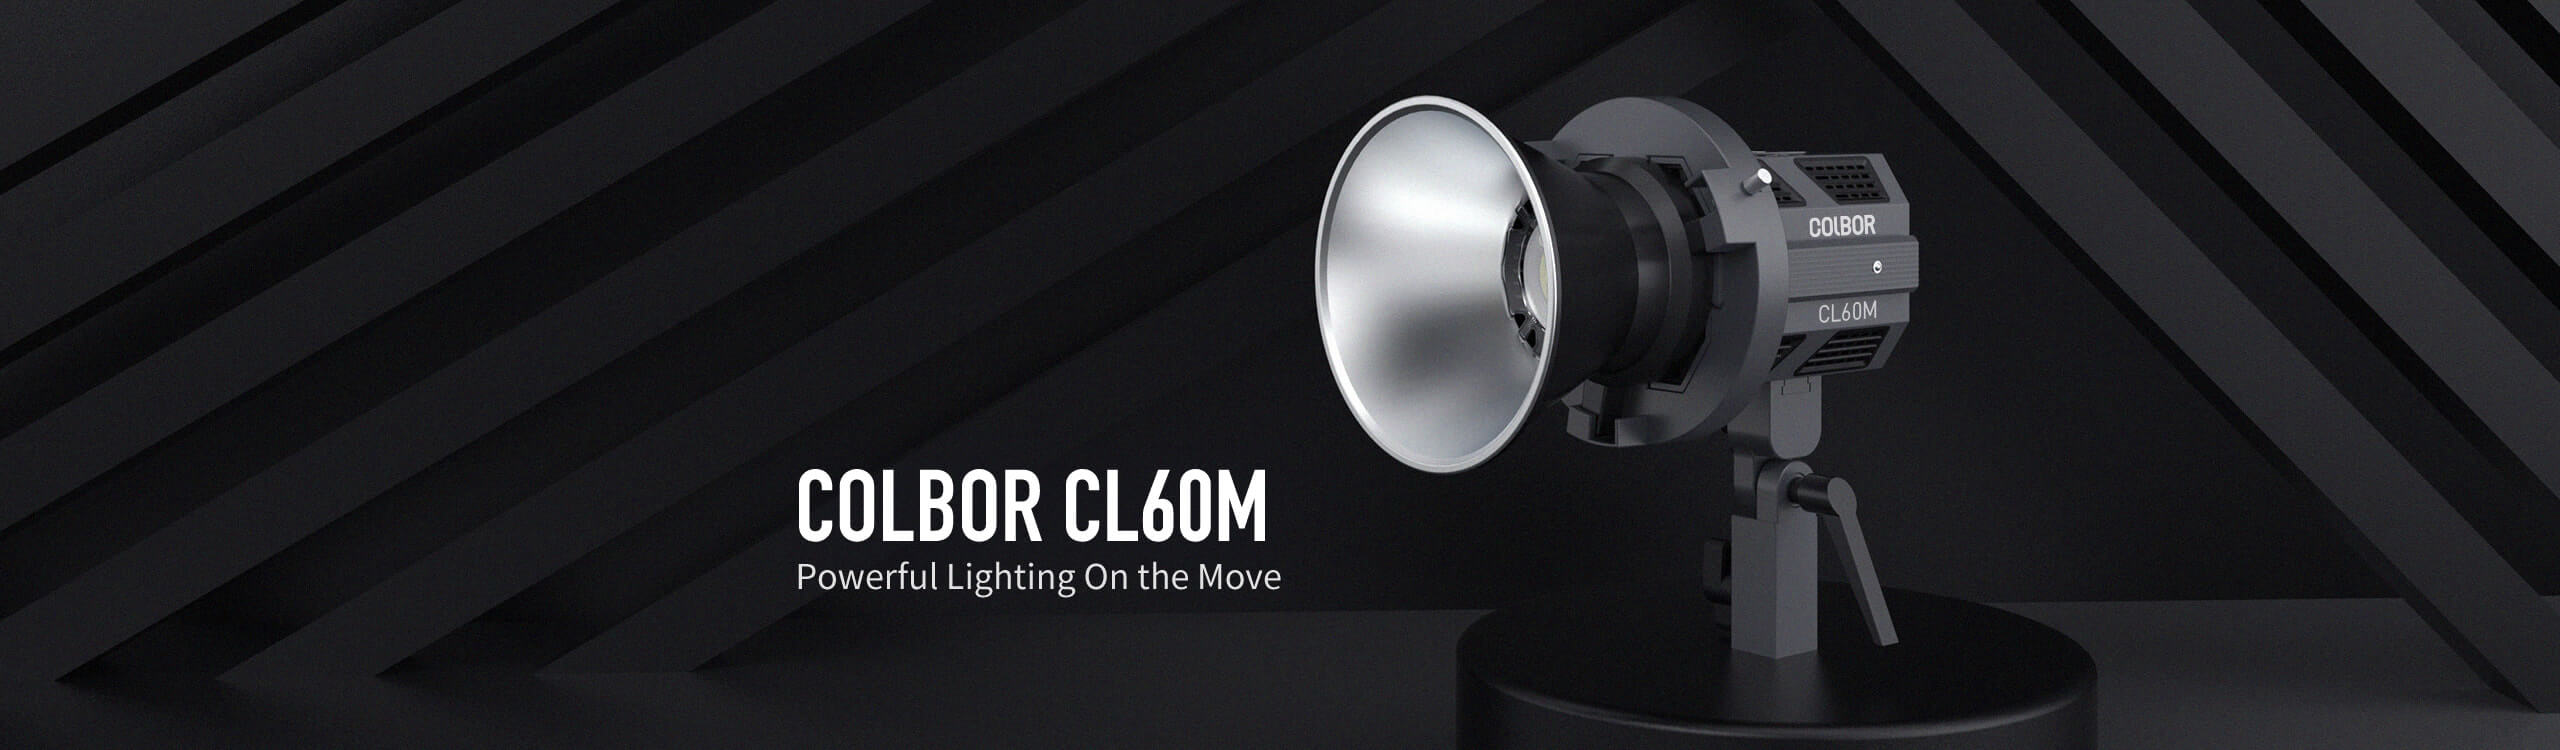 COLBOR CL60M studio light for video shooting comes with a Bowen-mount adapter, a standard reflector, and a light base.